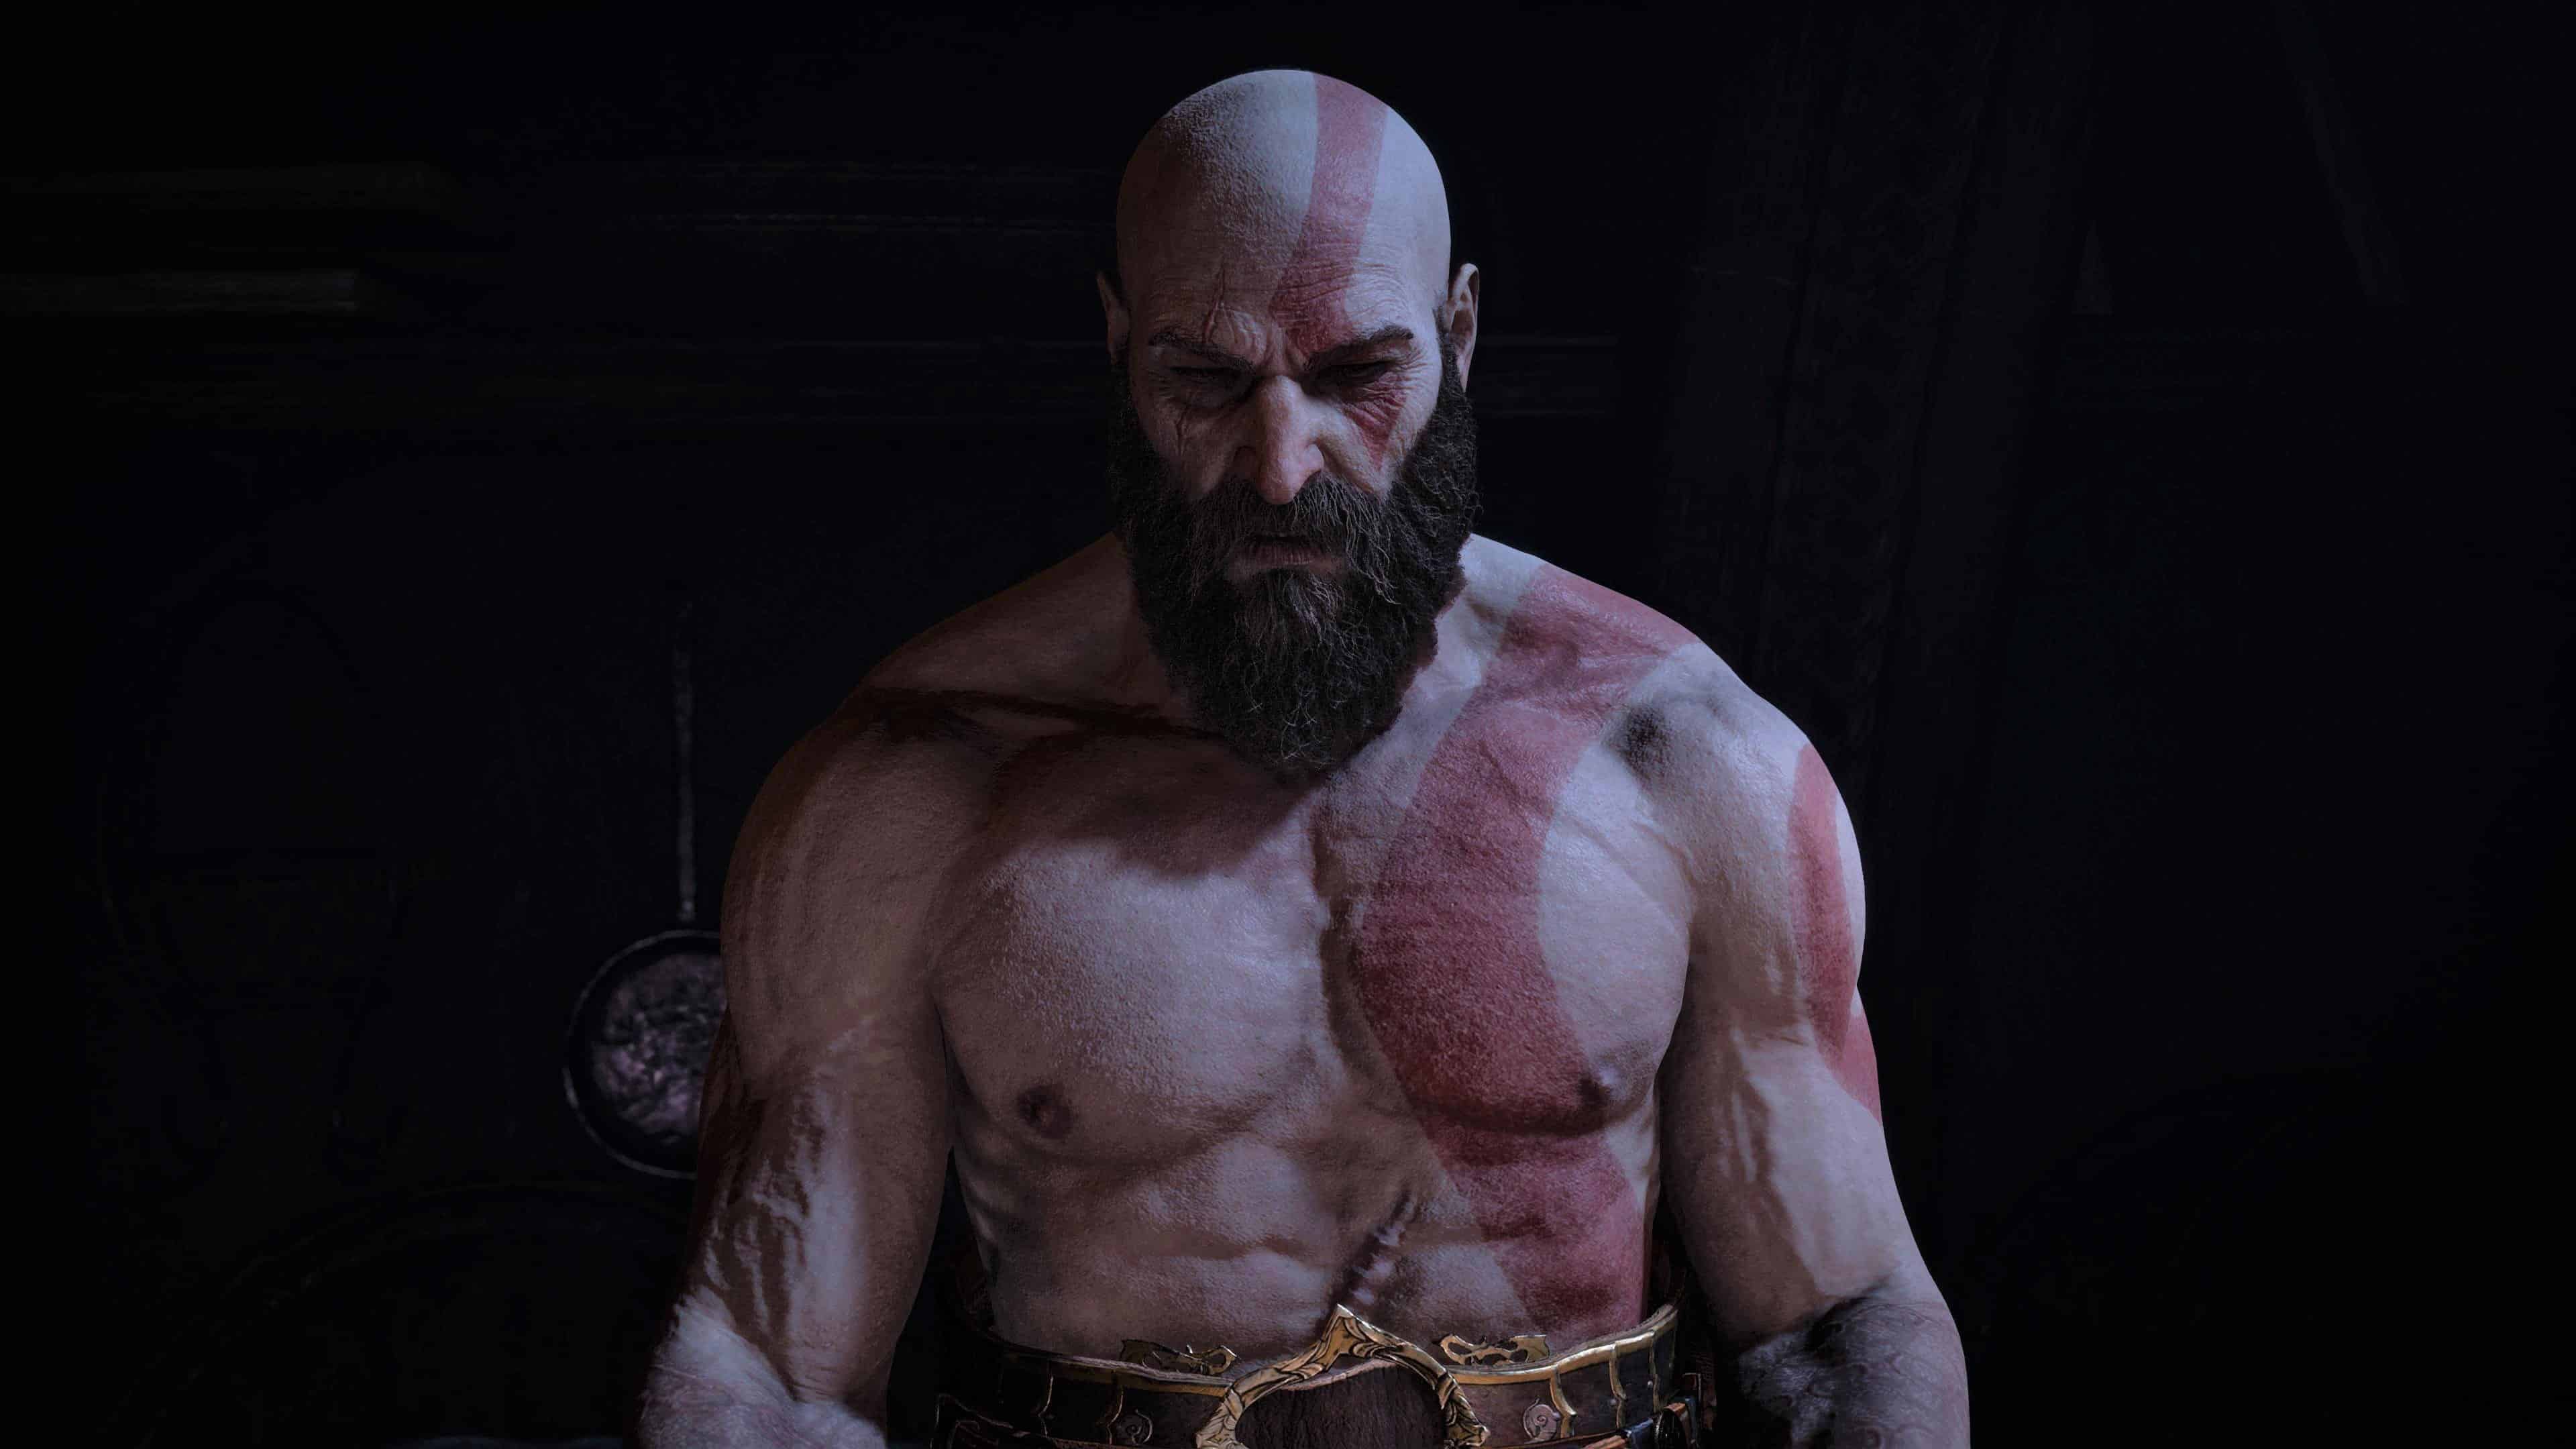 SPOILERS] Need help with GOW 3, for the third time : r/GodofWar